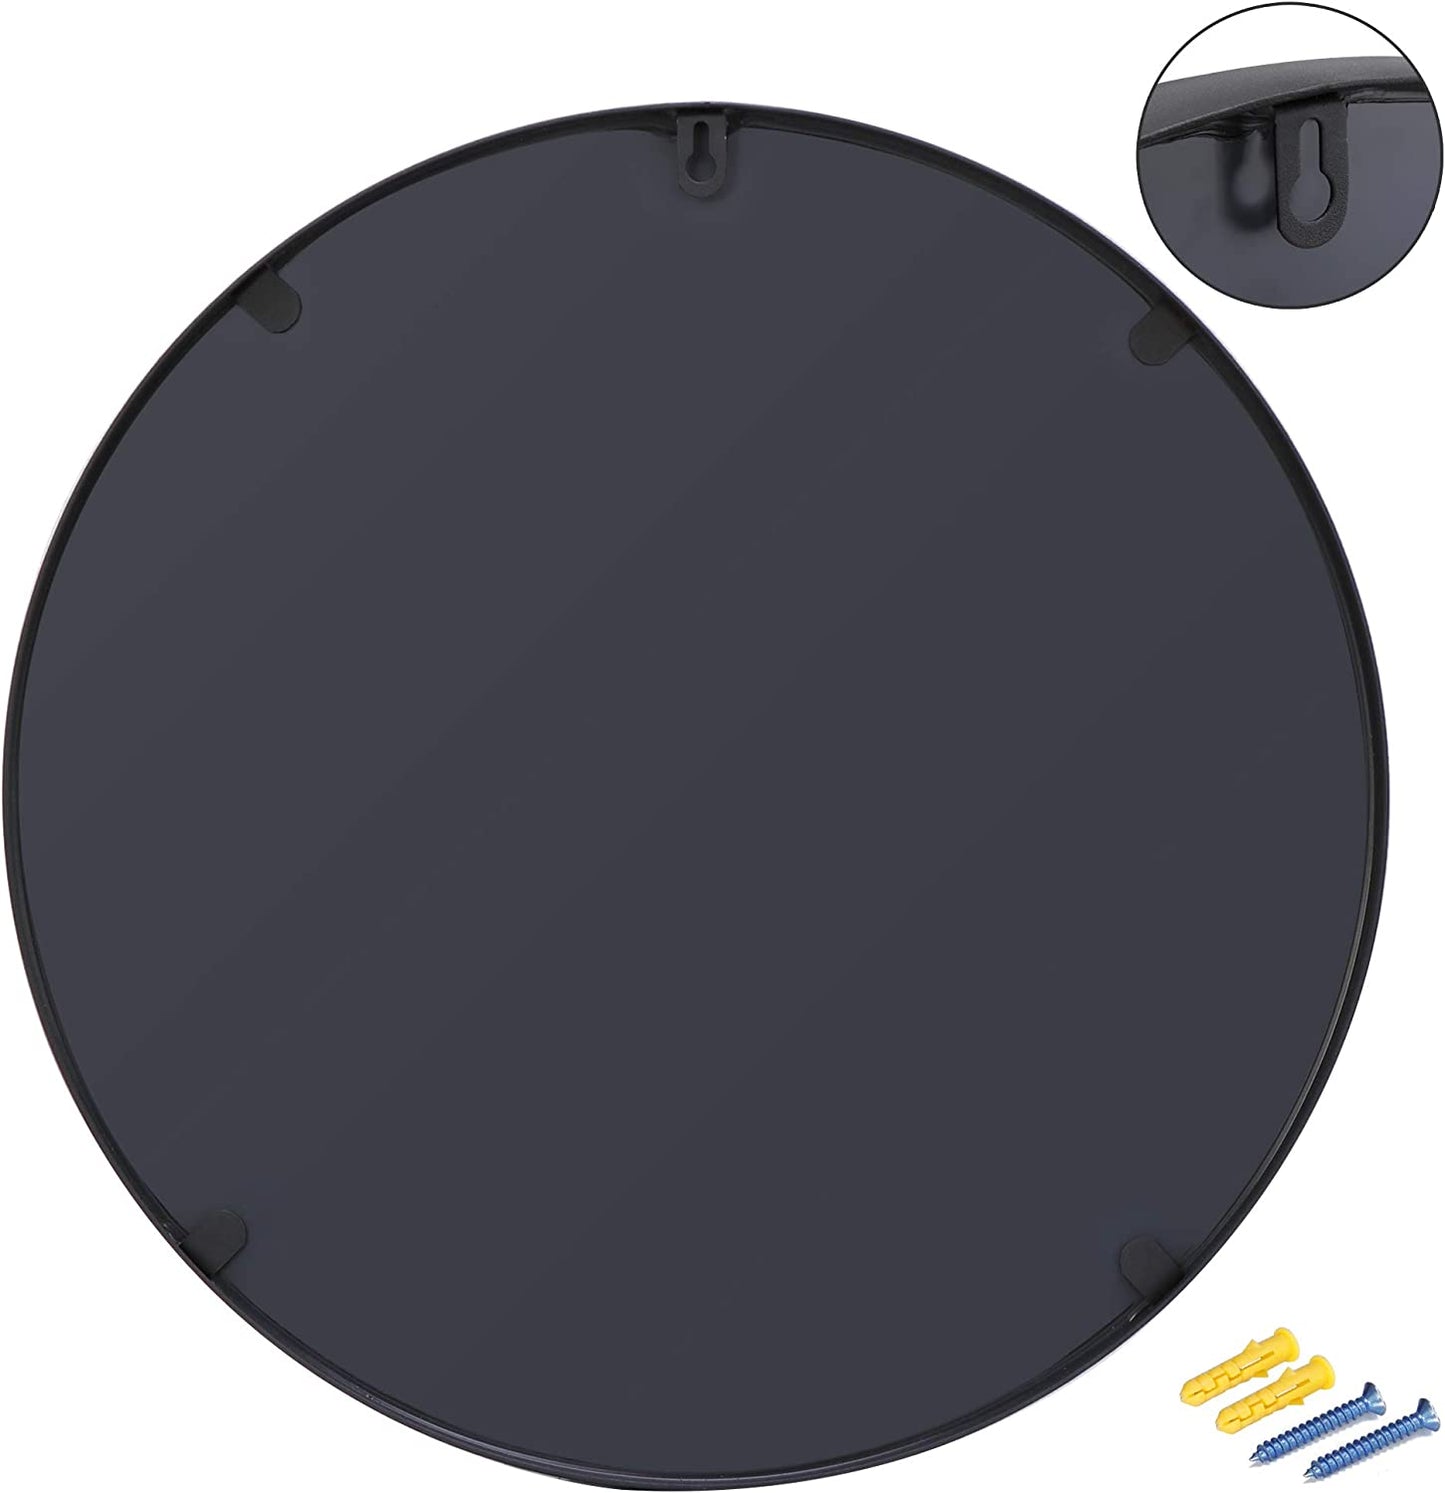 18 Inch Black Metal Framed Round Wall-Mounted Mirror for Bathroom, Wall Decor, Vanity, Living Room or Bedroom